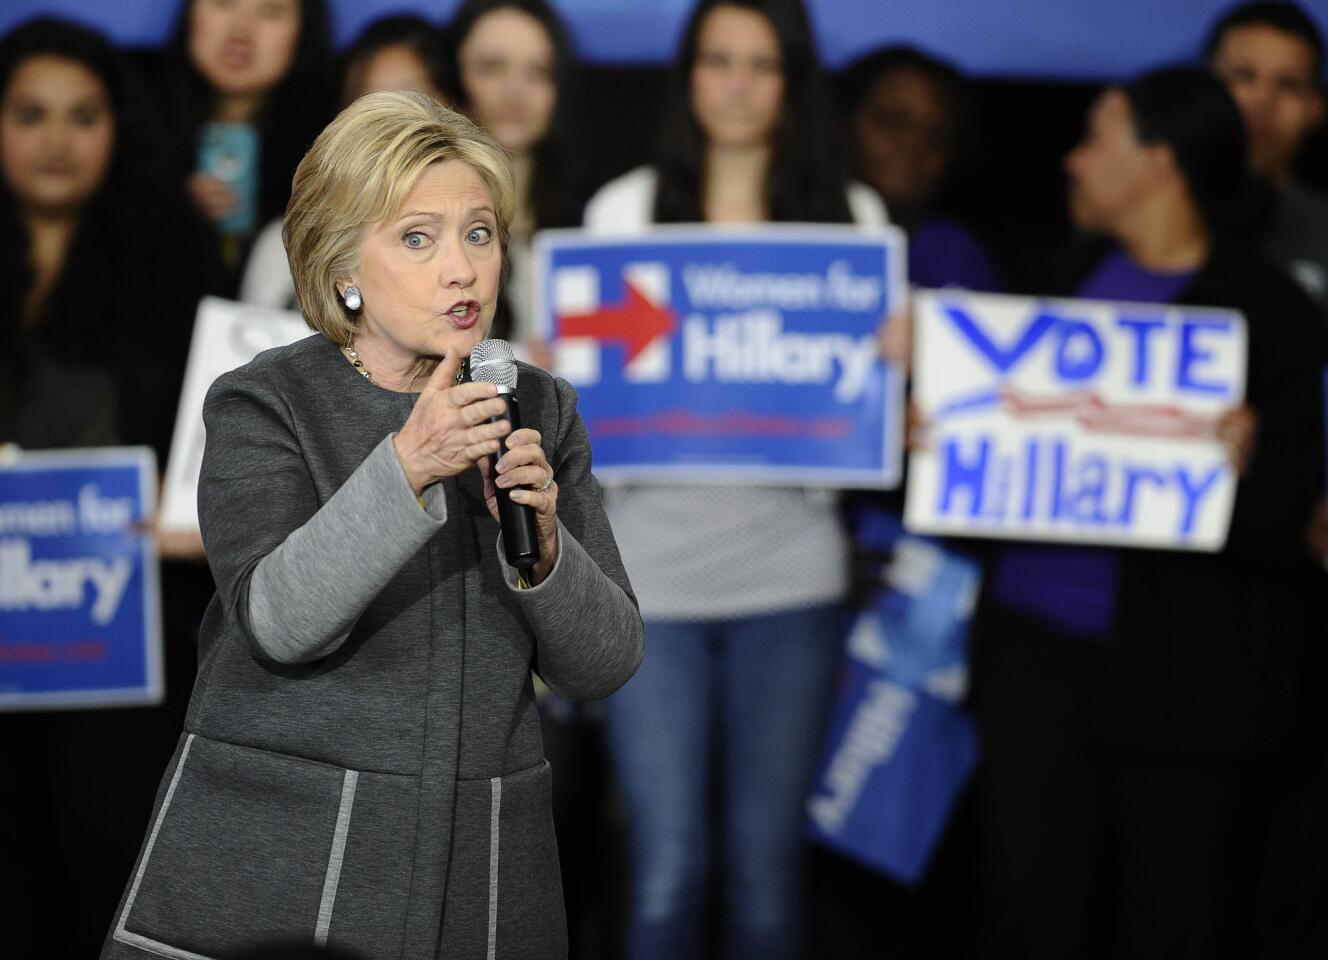 Hillary Clinton campaigns ahead of Super Tuesday